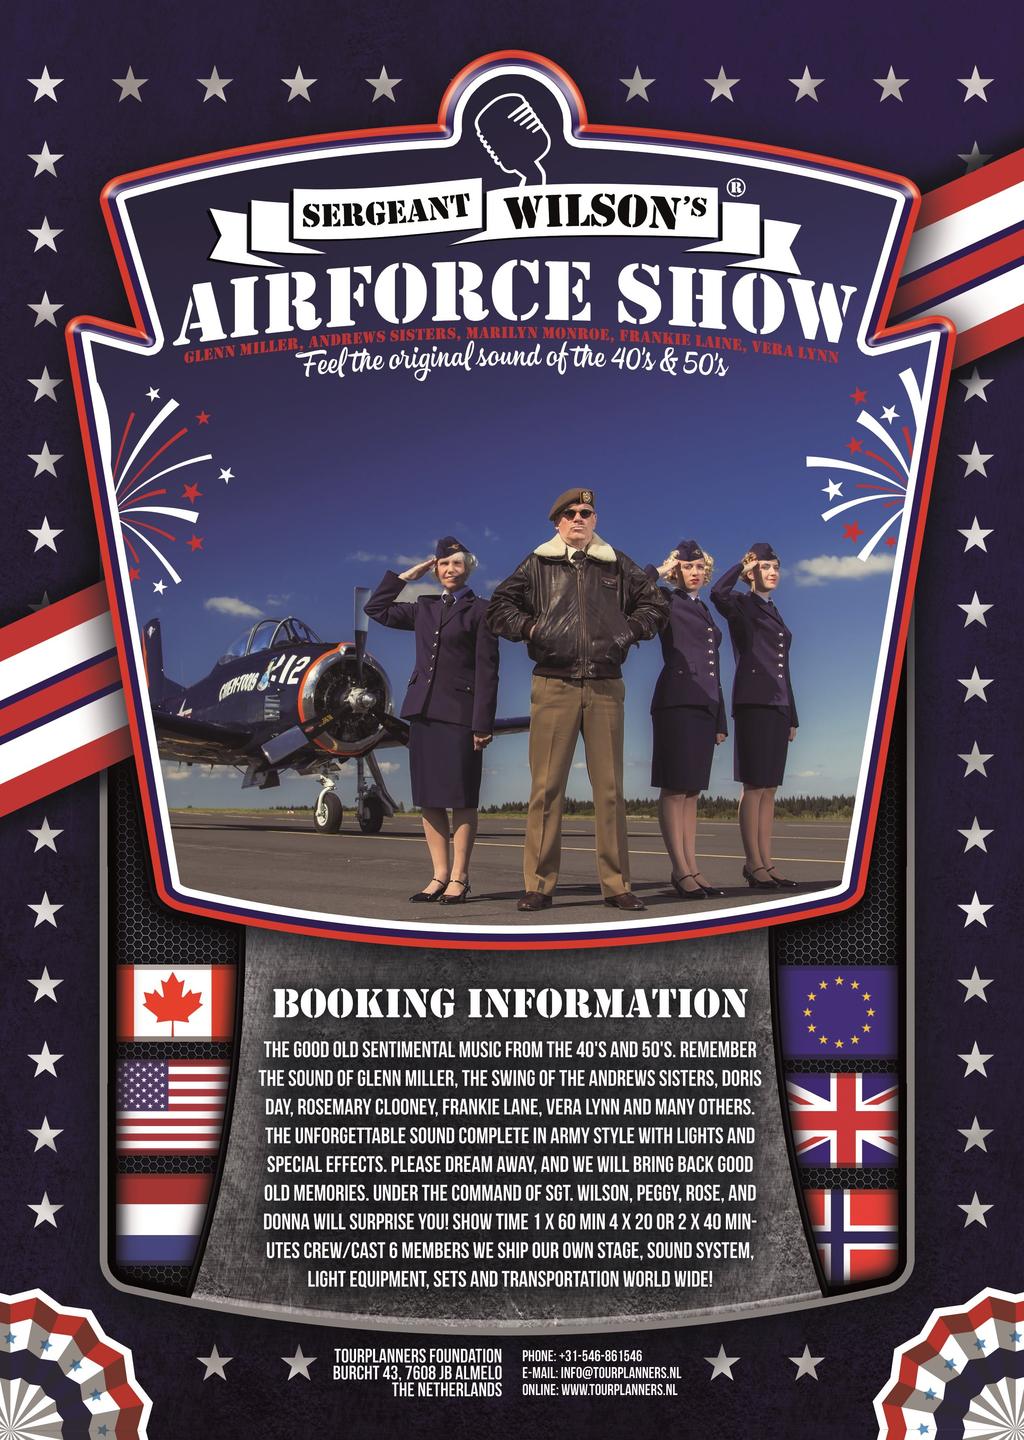 Sgt. Wilson s Airforce Show Wednesday, November 29th @ 7:00pm The good old sentimental music from the 40 s and 50 s.